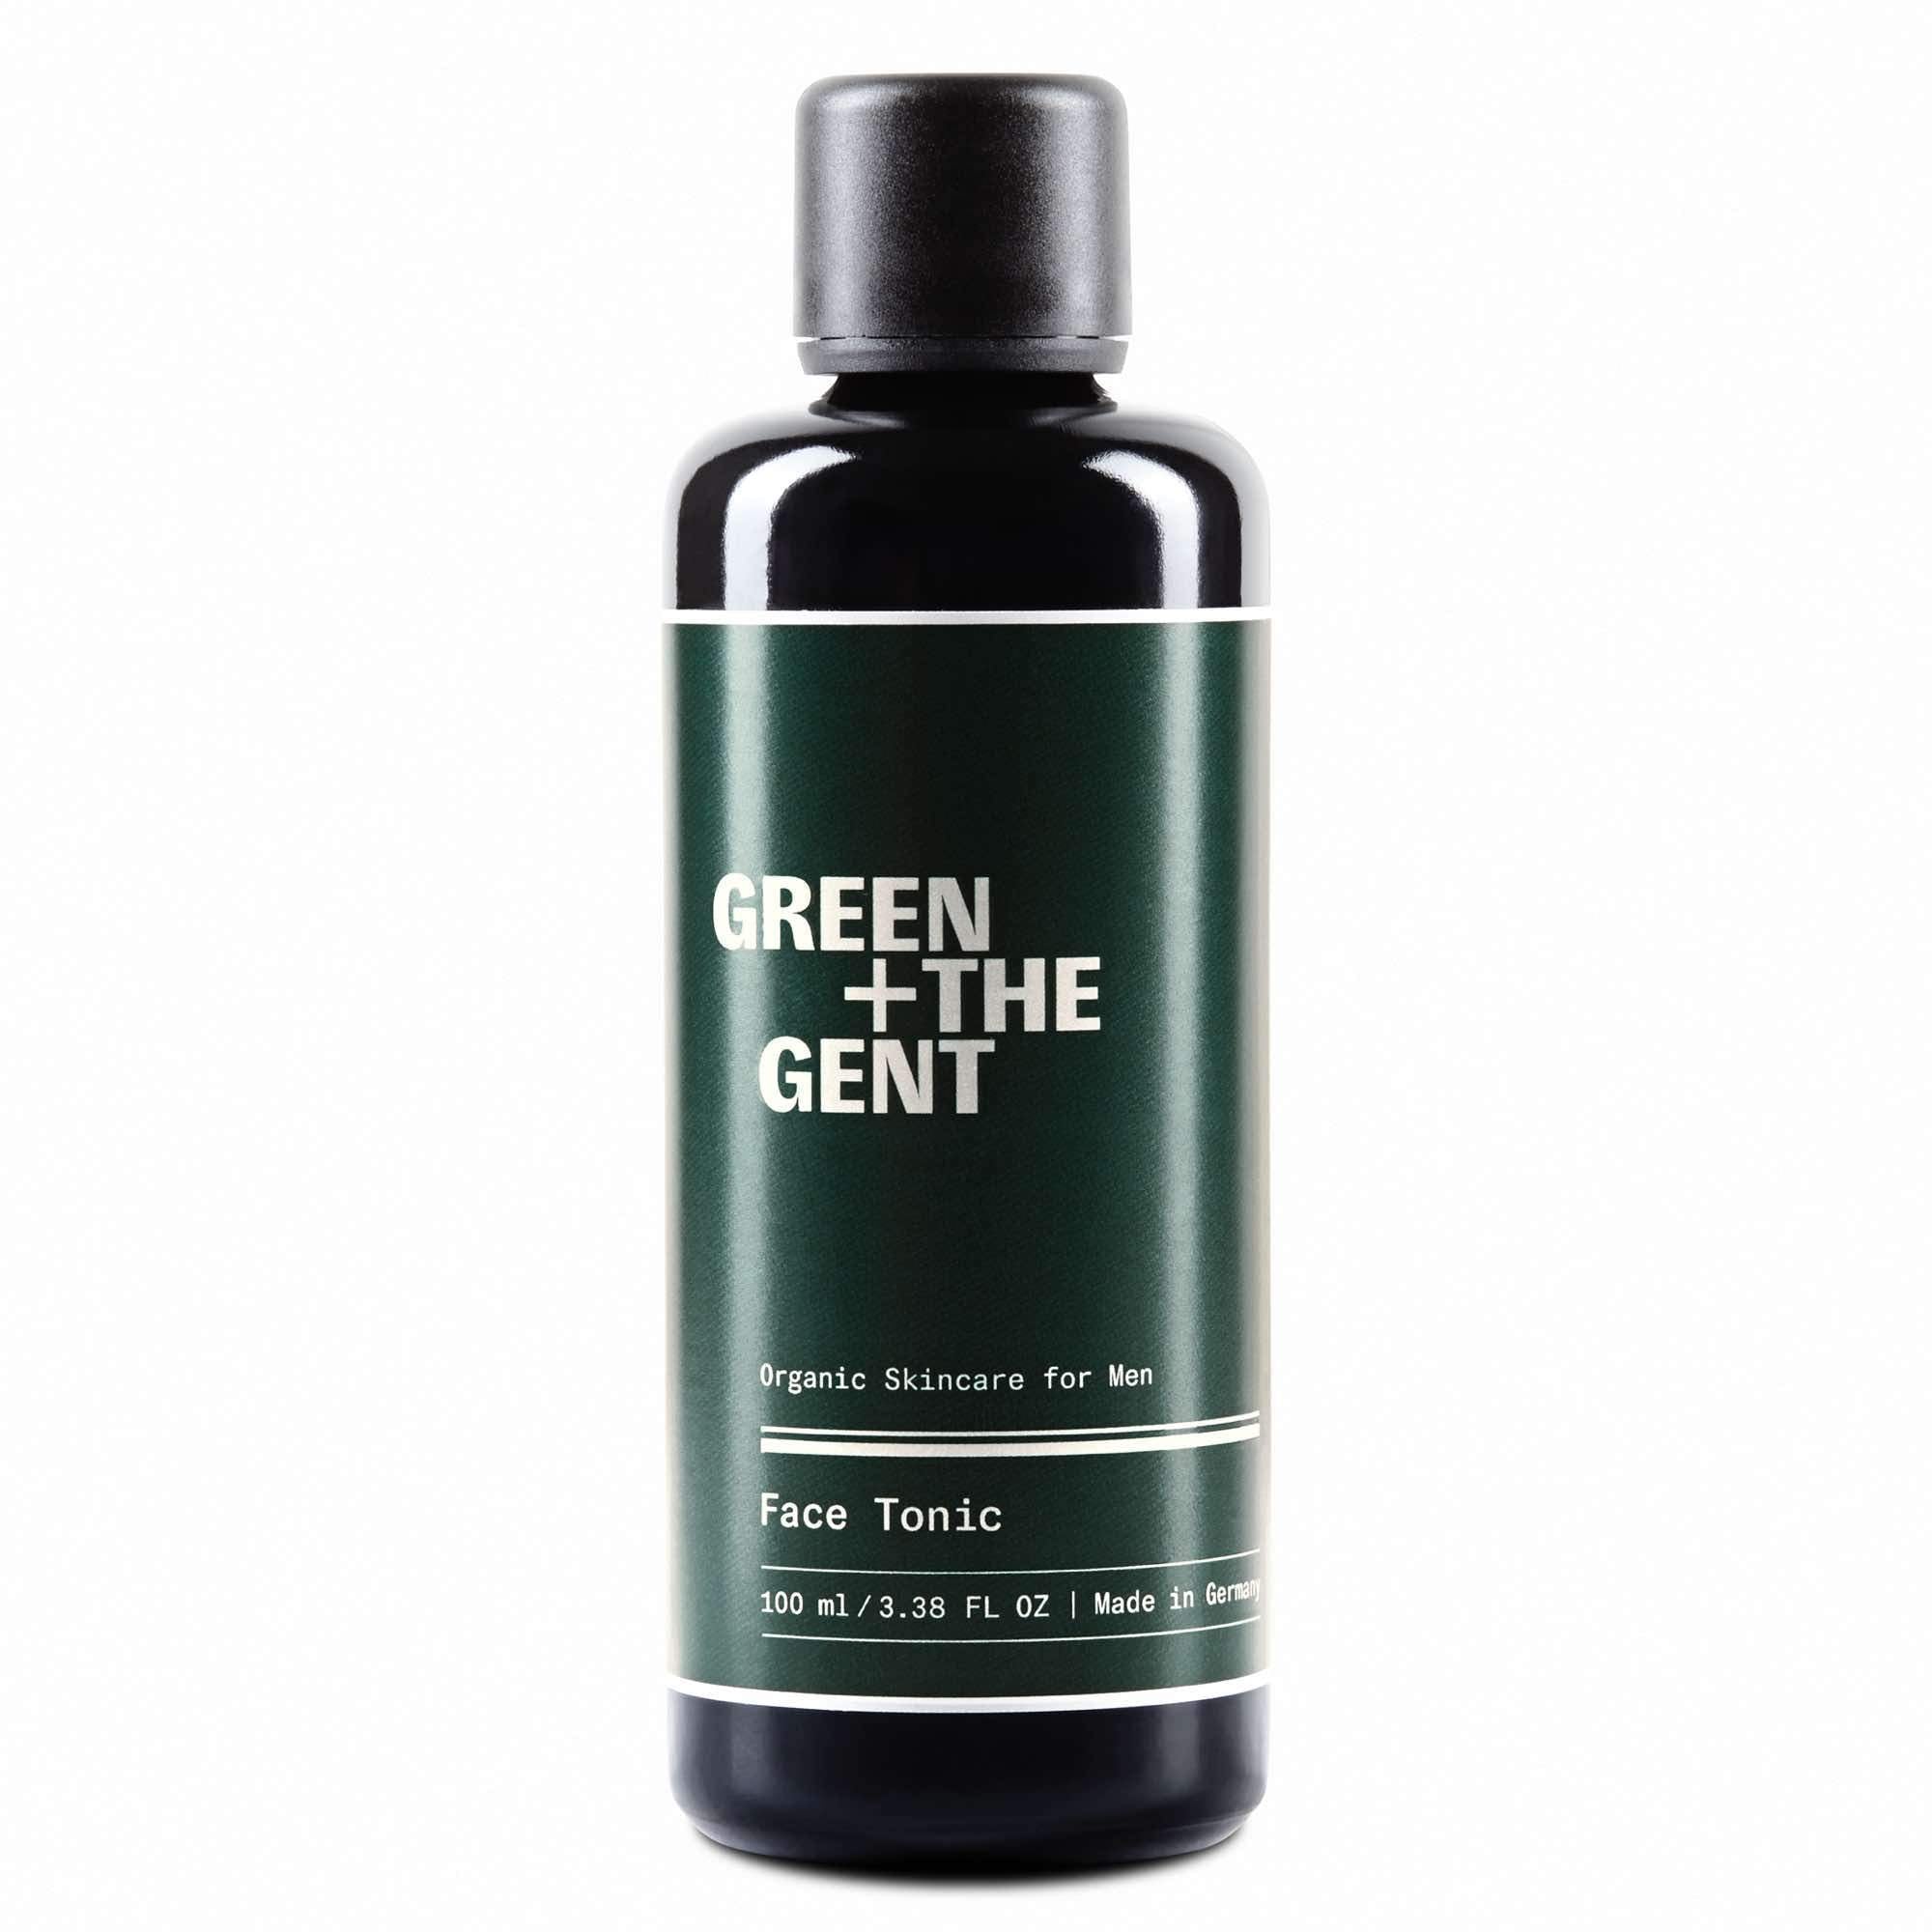 2-in-1 Gesichtstoner & Aftershave | Face Tonic - Green + the Gent